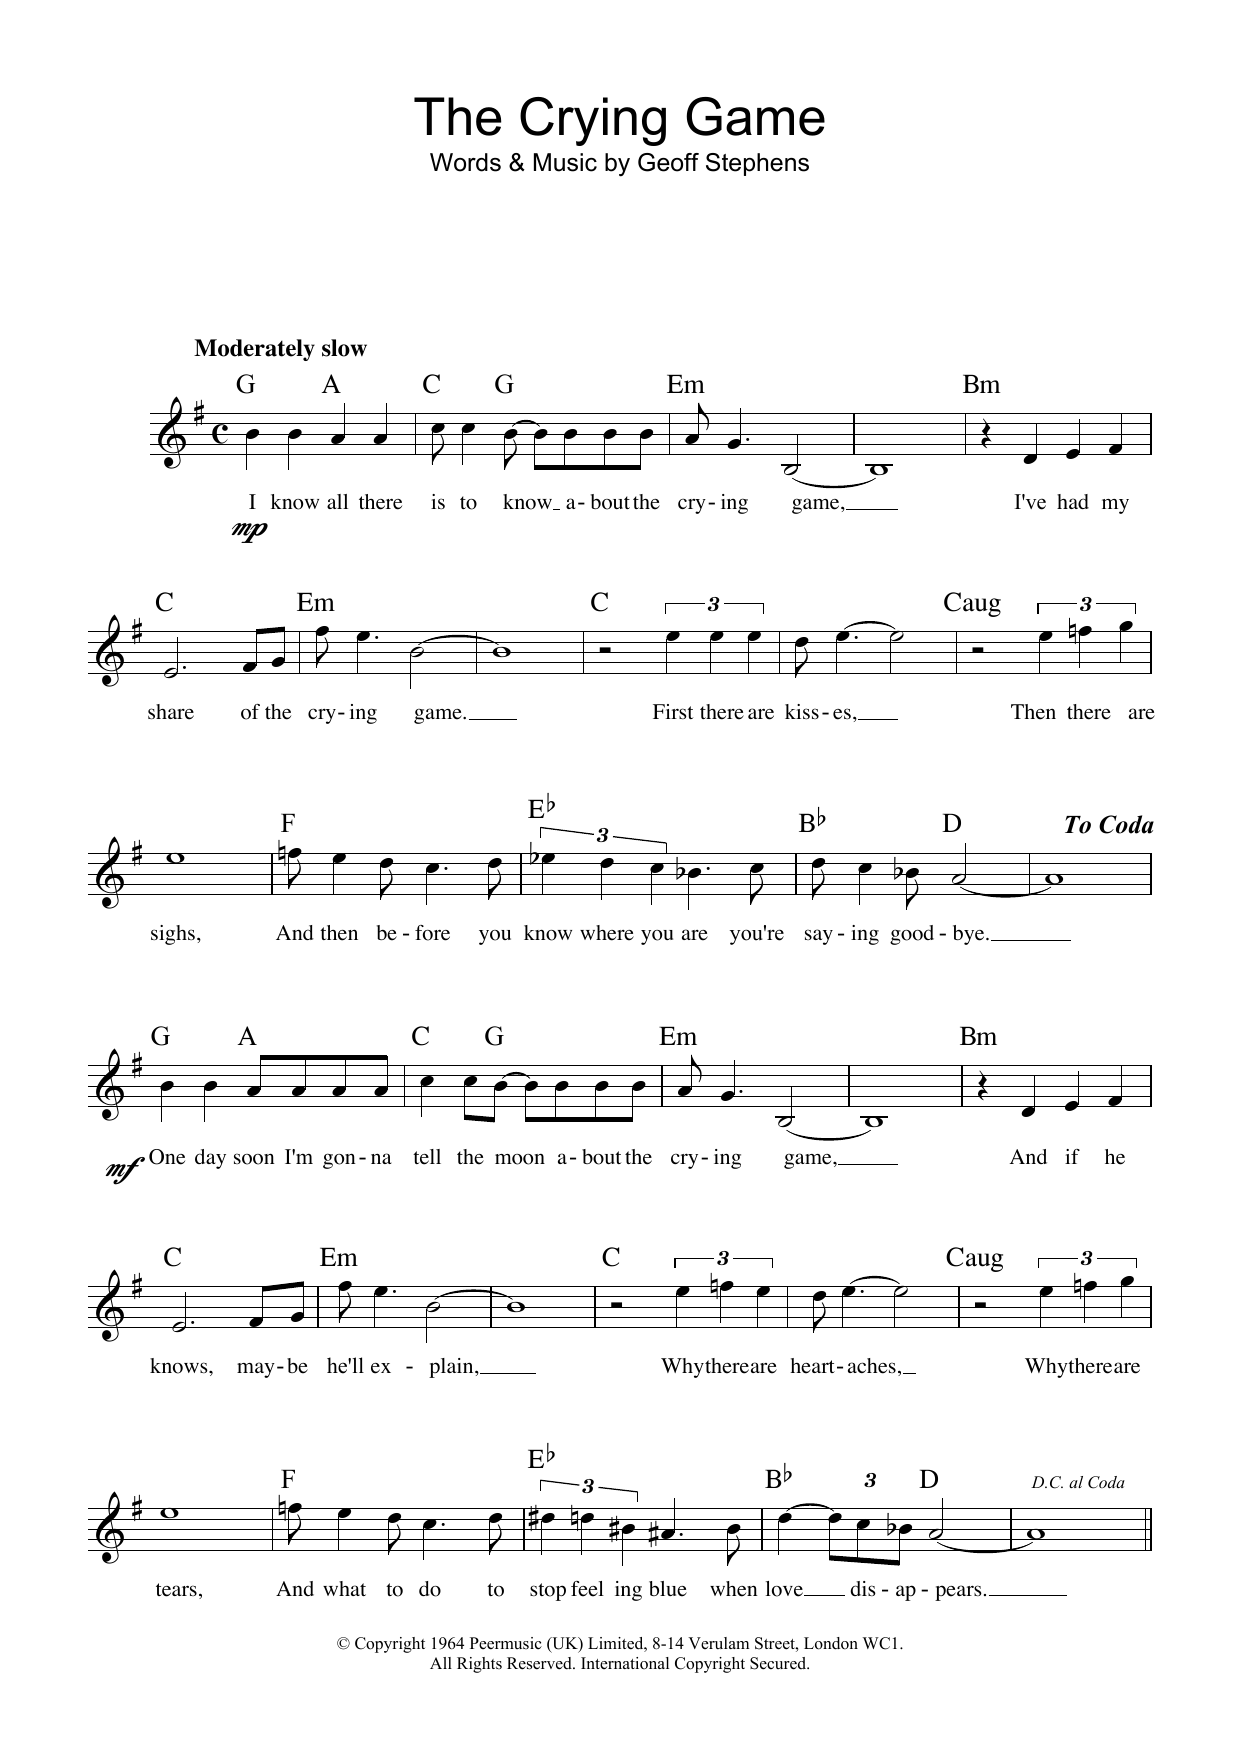 Download Geoff Stephens The Crying Game Sheet Music